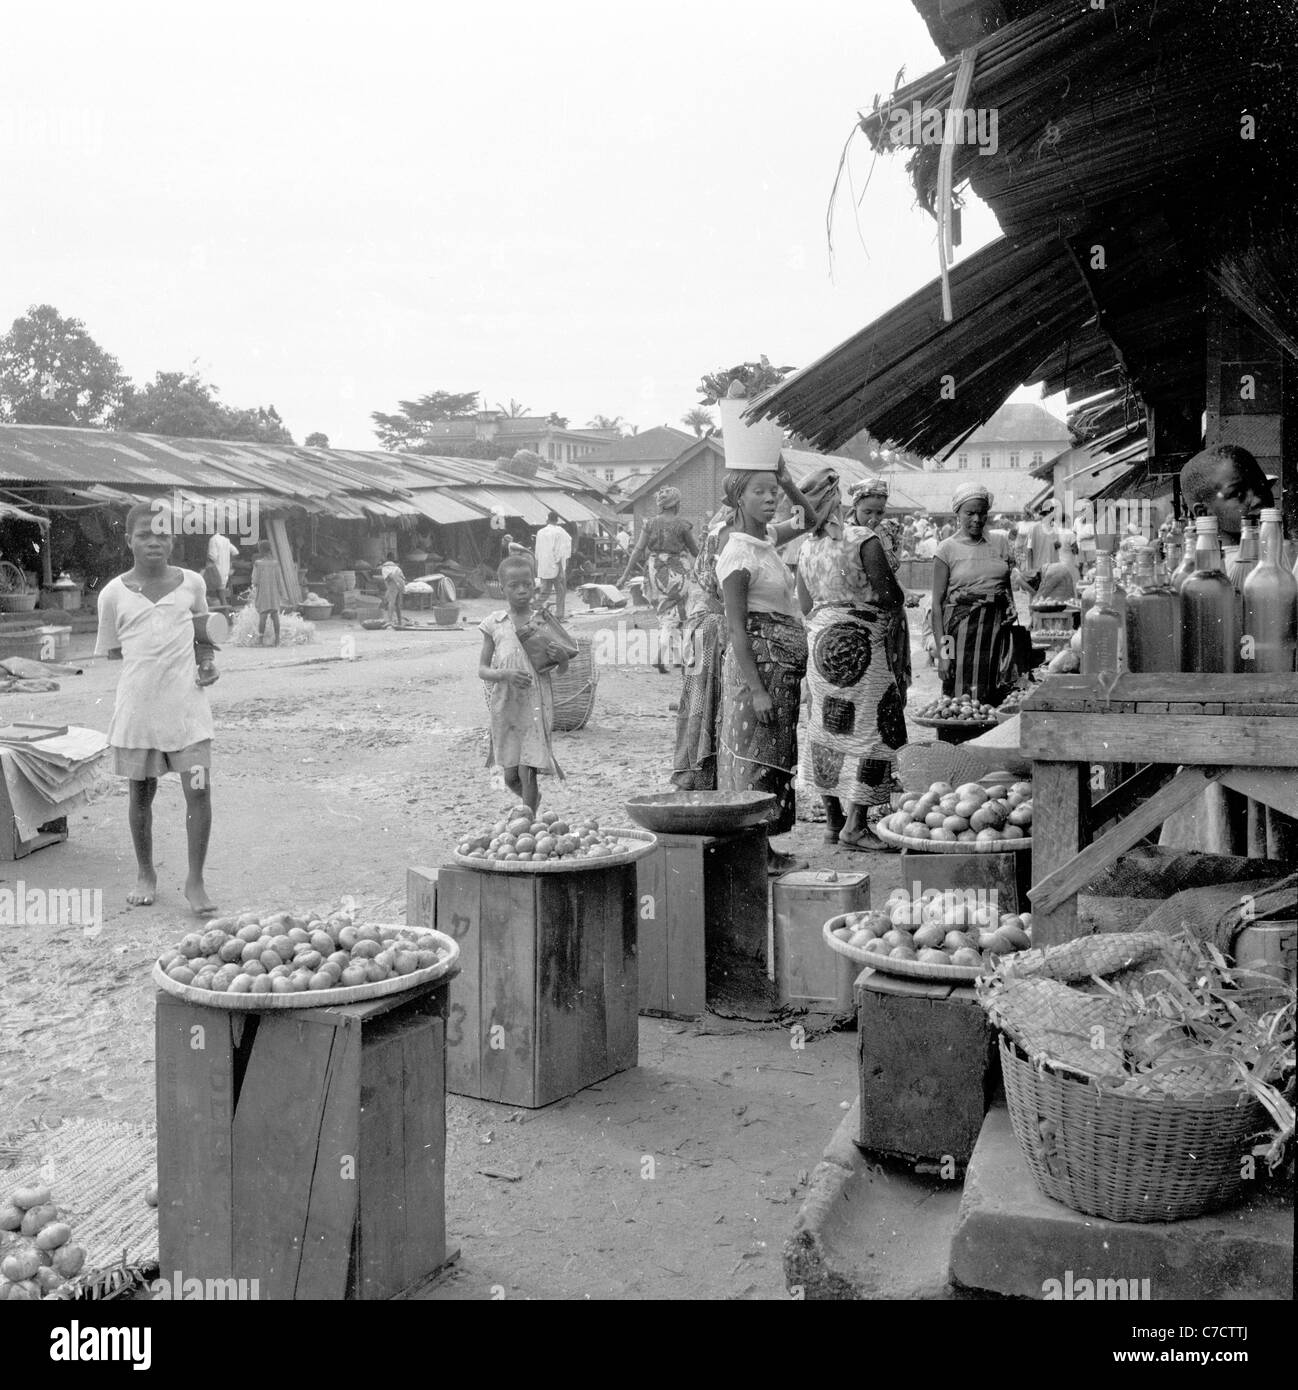 View of a Nigerian village market, with fruits on display in this historical picture taken in the1950s by J. Allan Cash. Stock Photo